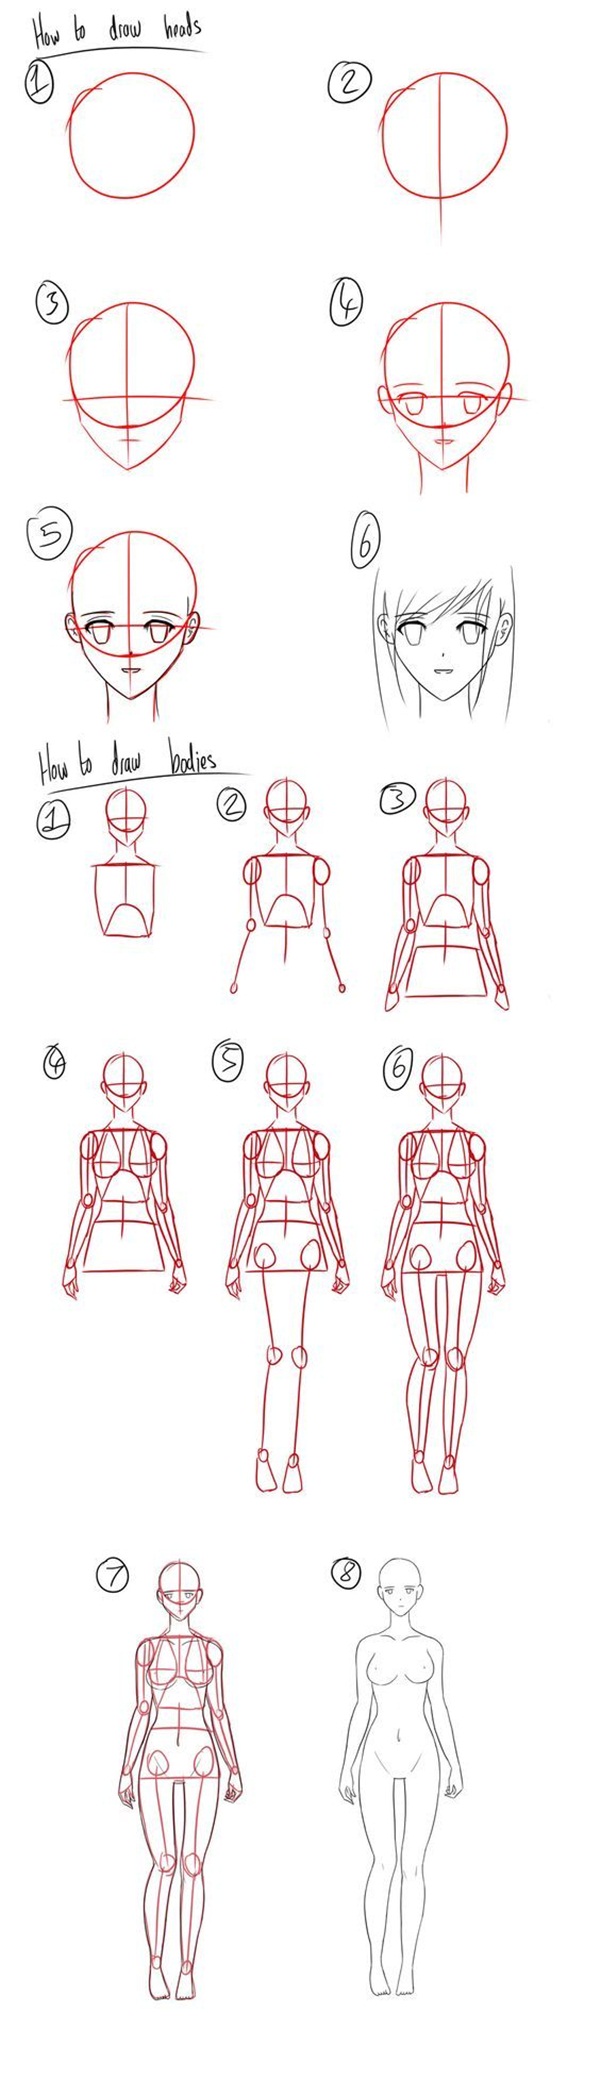 How To Draw Anime Step By Step For Beginners / How to Draw an Anime Boy